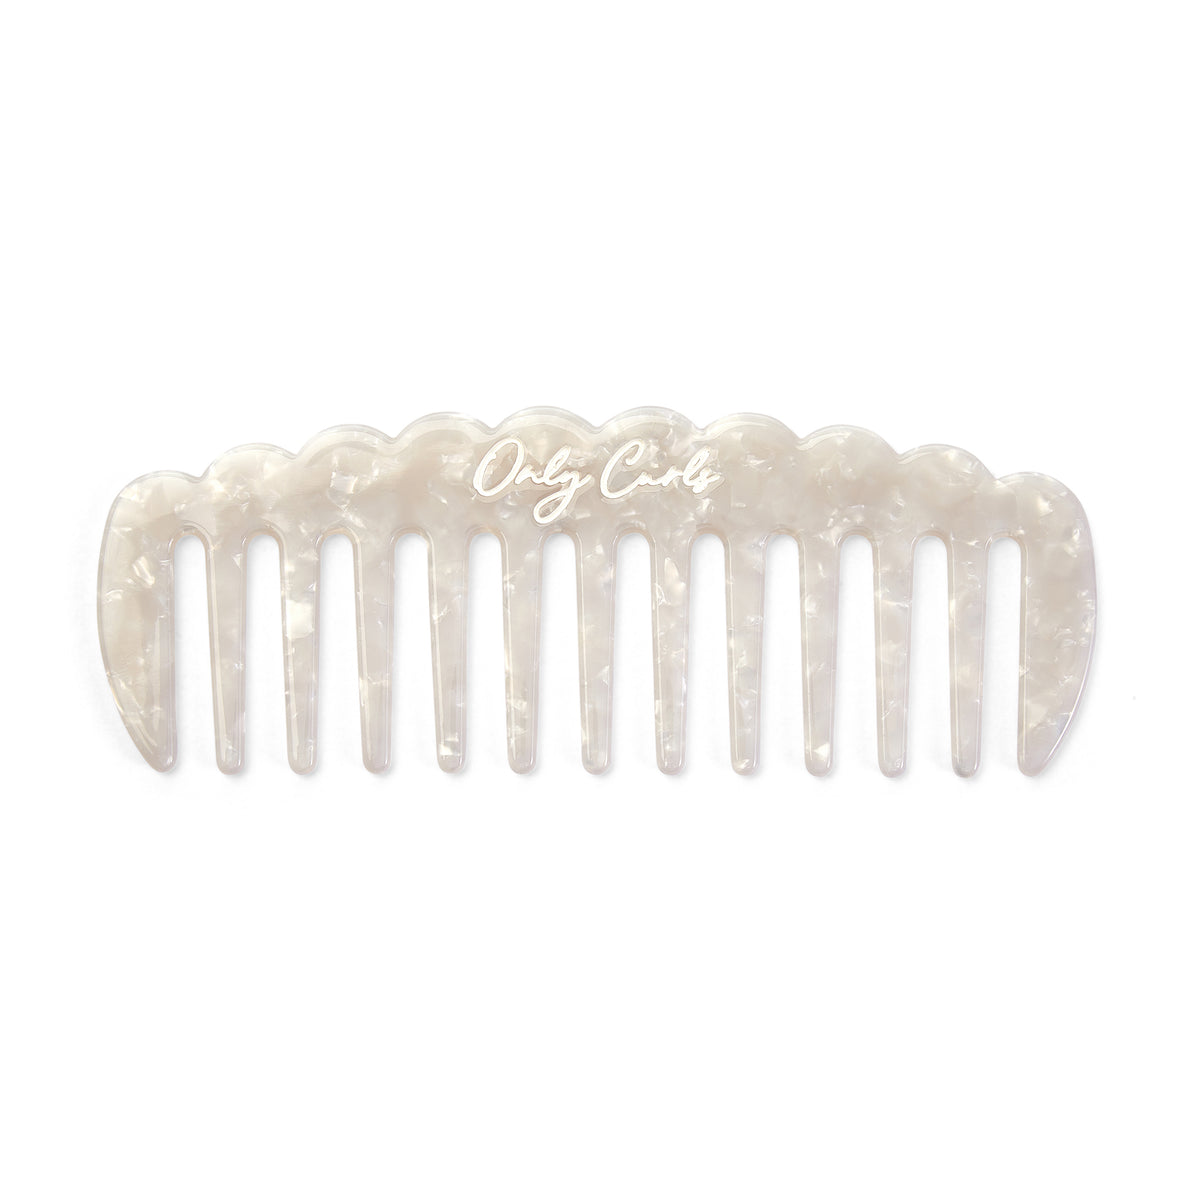 Only Curls White Shimmer Comb - Only Curls